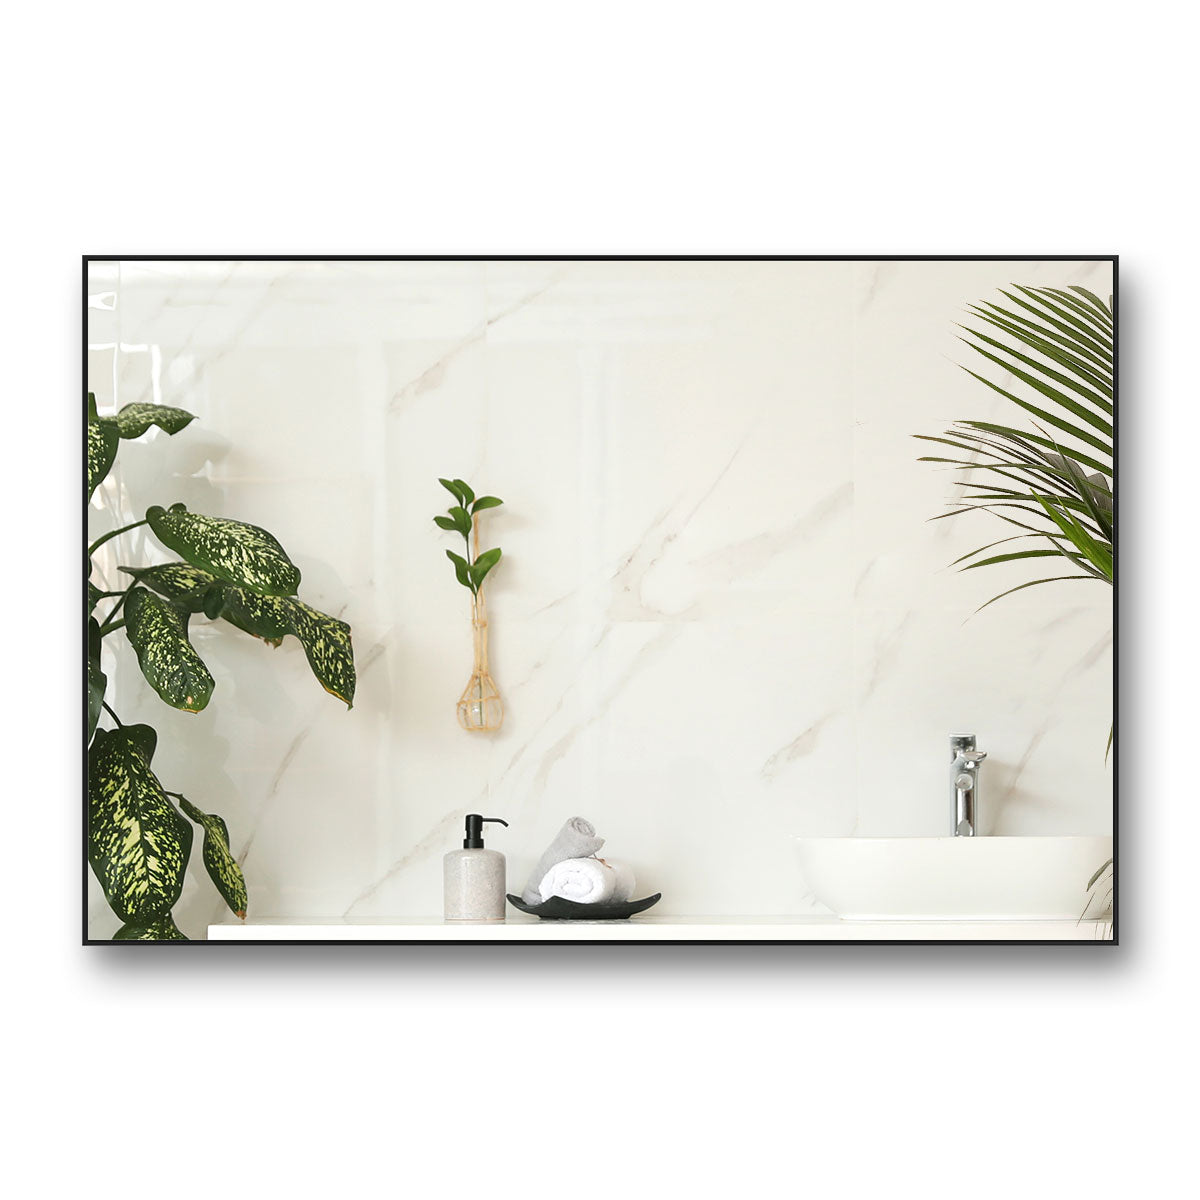 Large Modern Wall Mirror for Bathroom, 36" x 24" White Rectangle Wall Mounted Mirror Hangs Horizontal or Vertical for Bedroom Bathroom Hallway